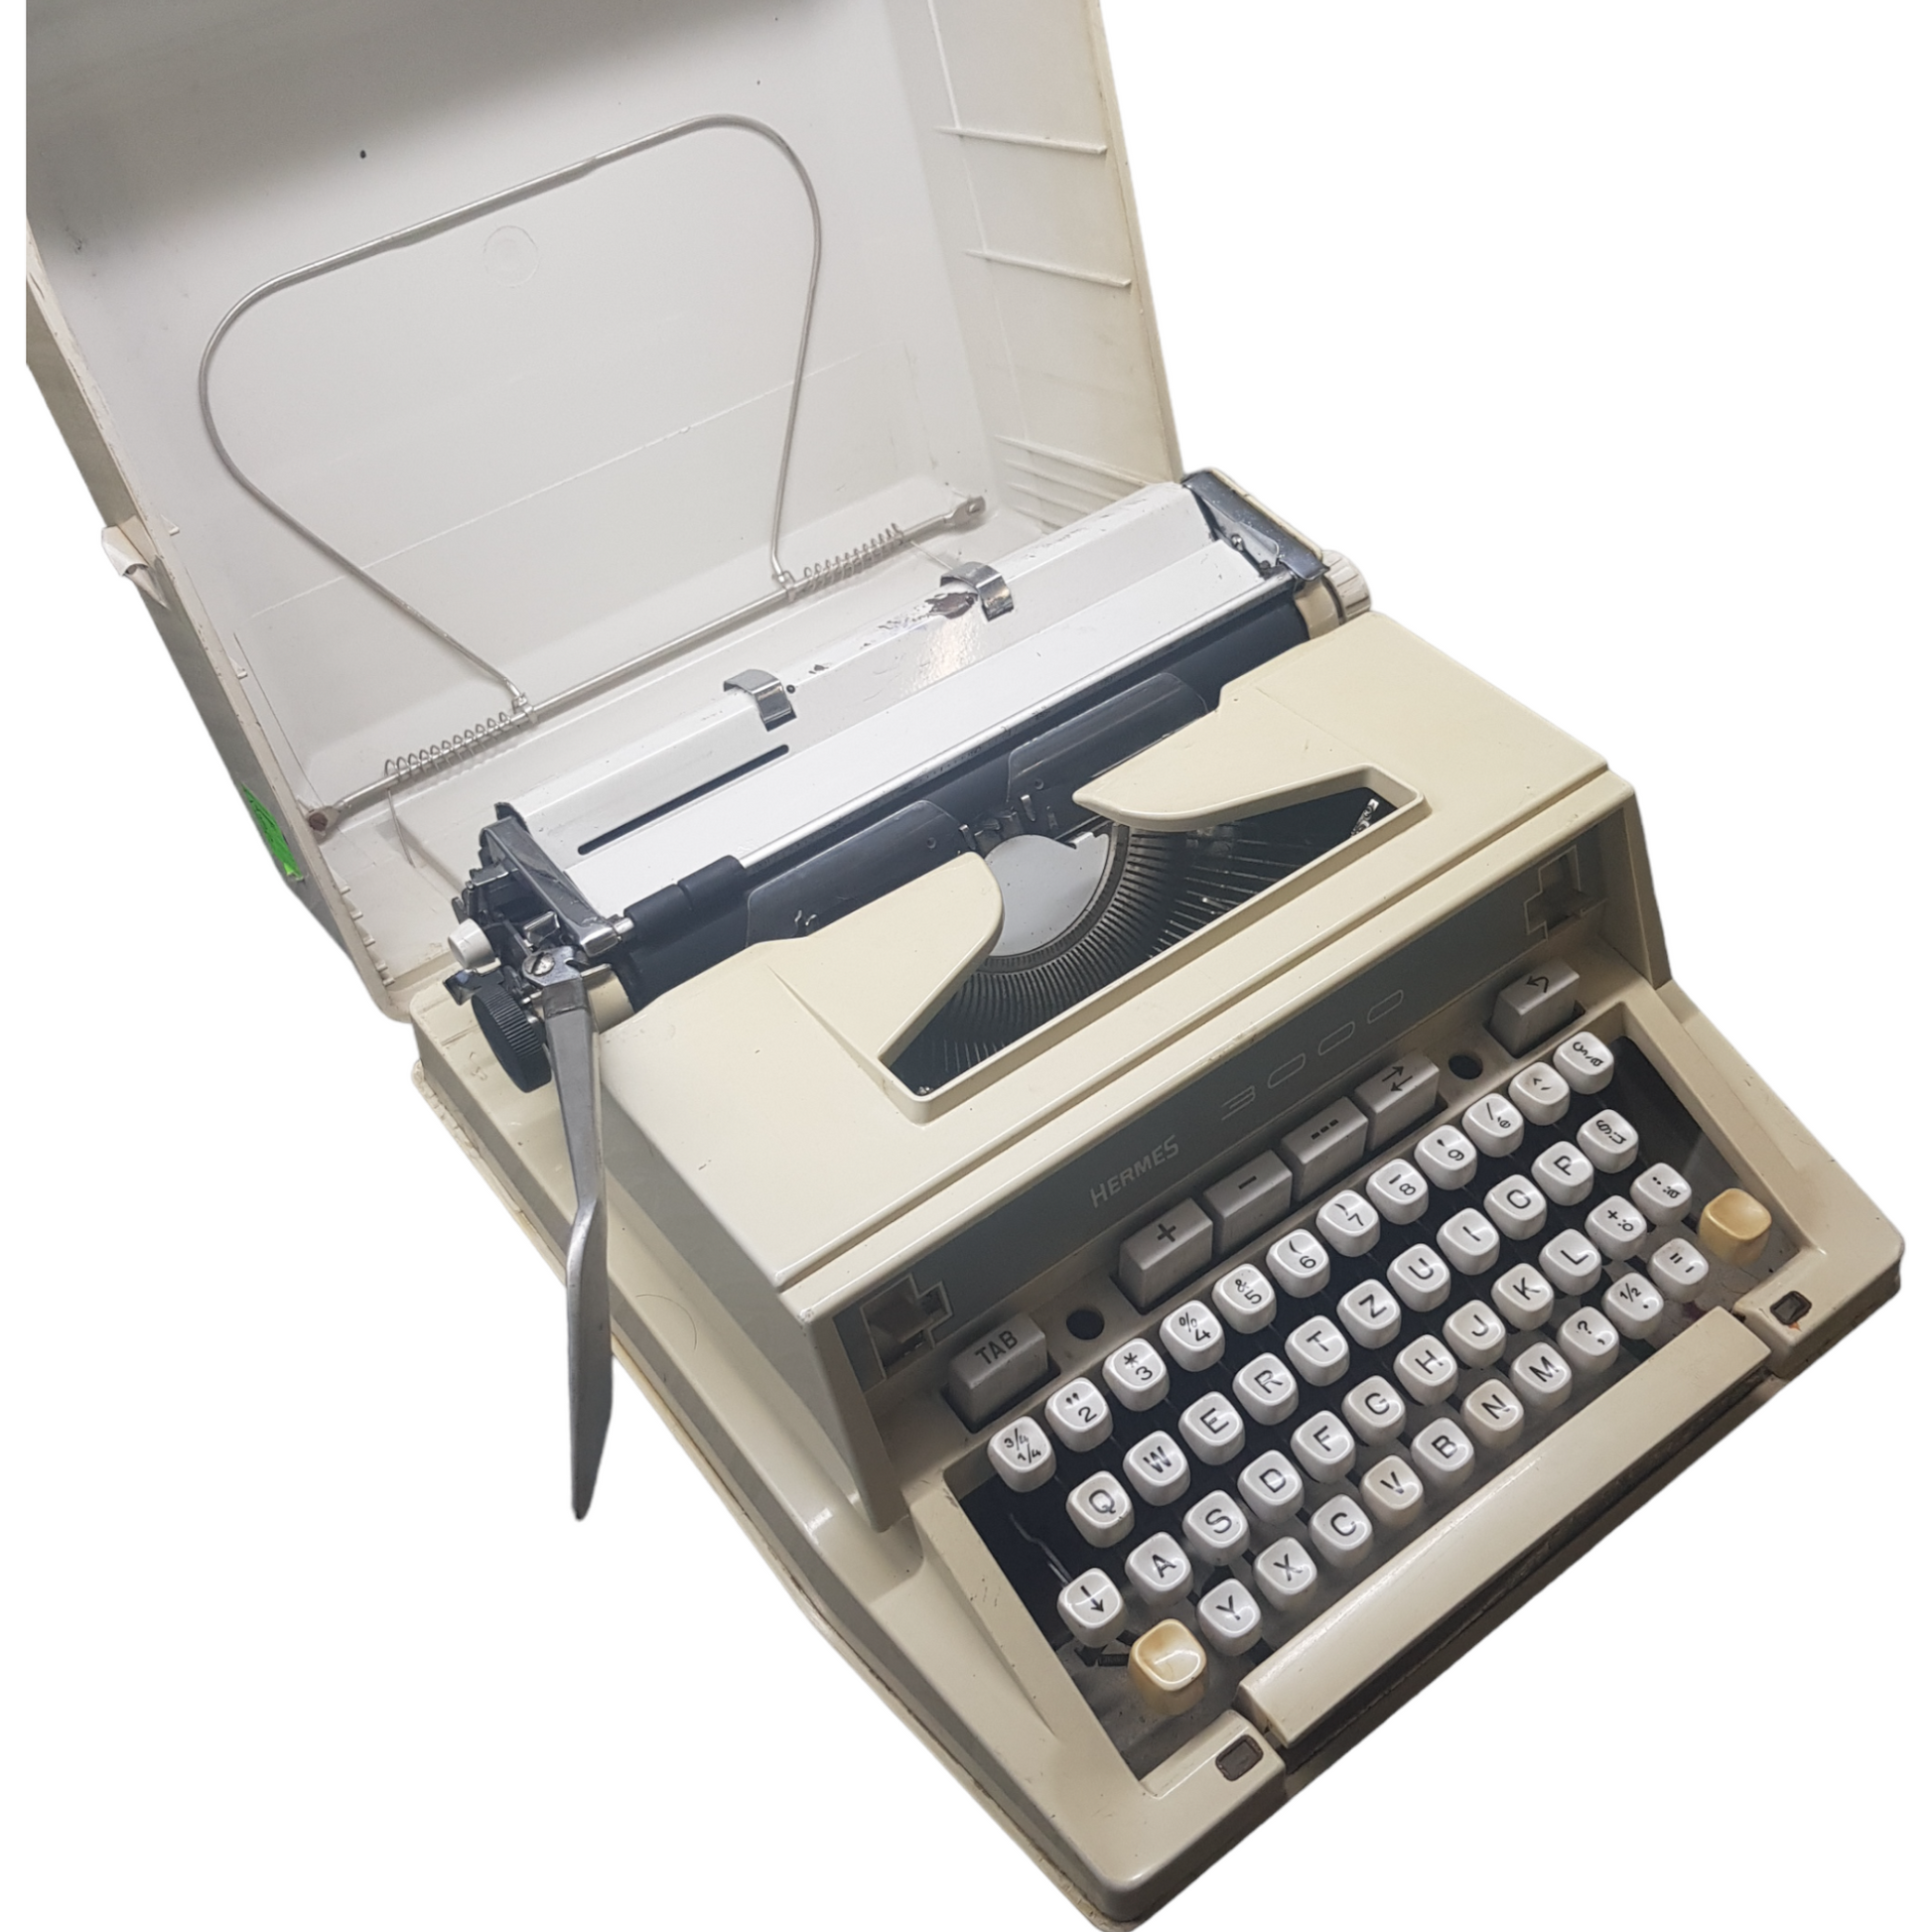 Image of Hermes 3000 Typewriter. Big Portable Typewriter. Swiss Made. Available from universaltypewritercompany.in